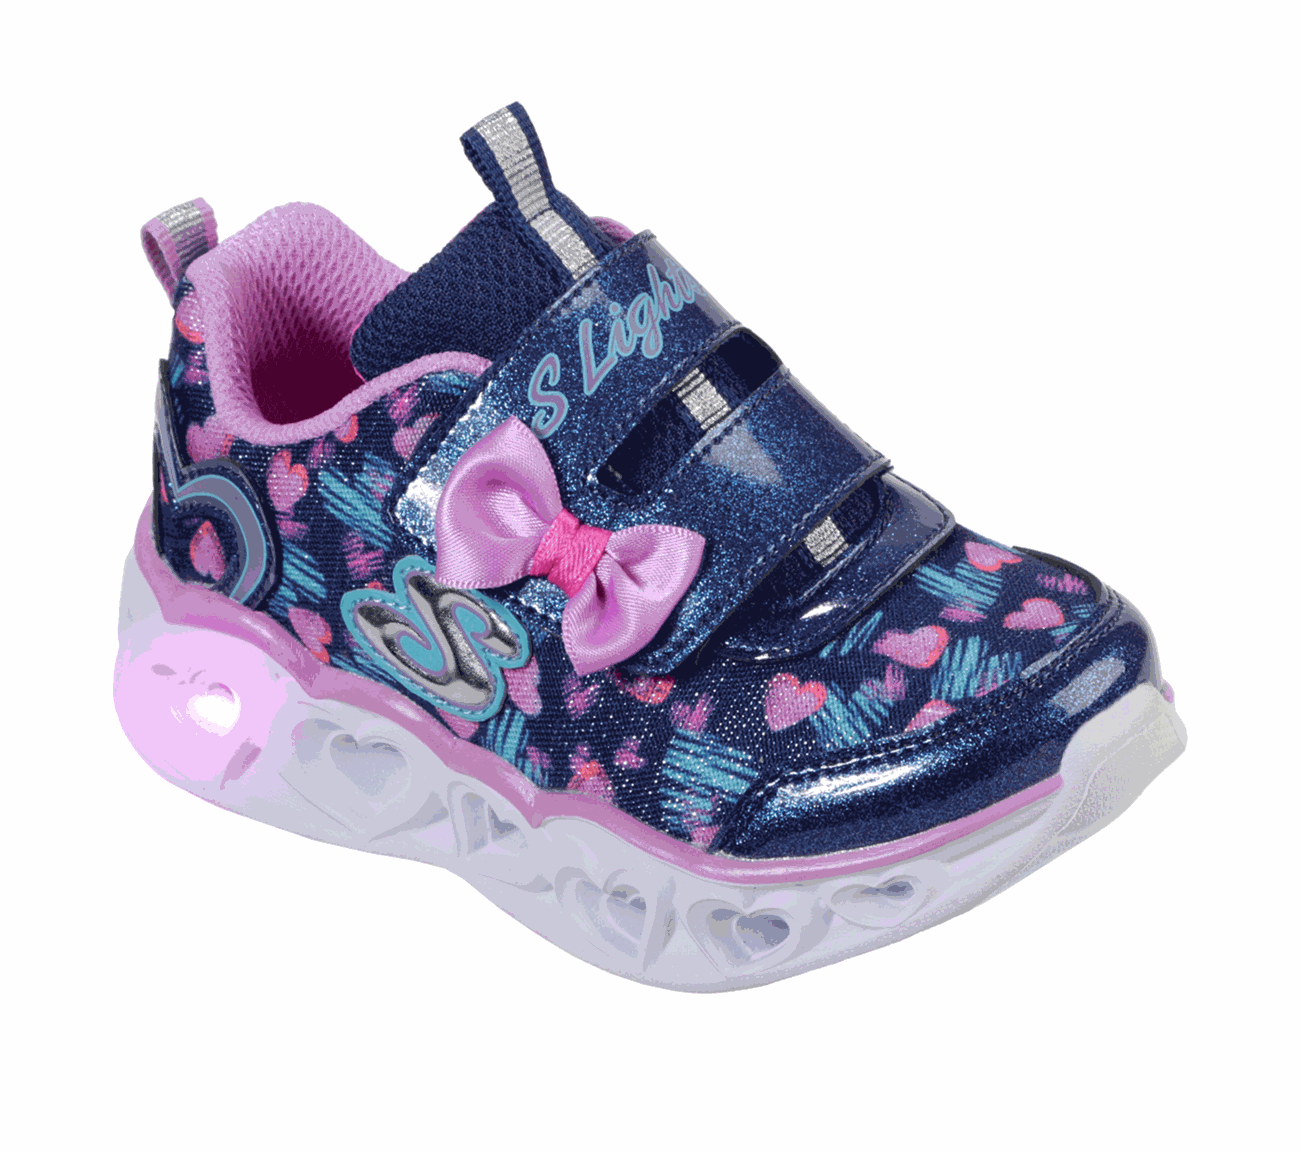 buy \u003e skechers store midland, Up to 73% OFF